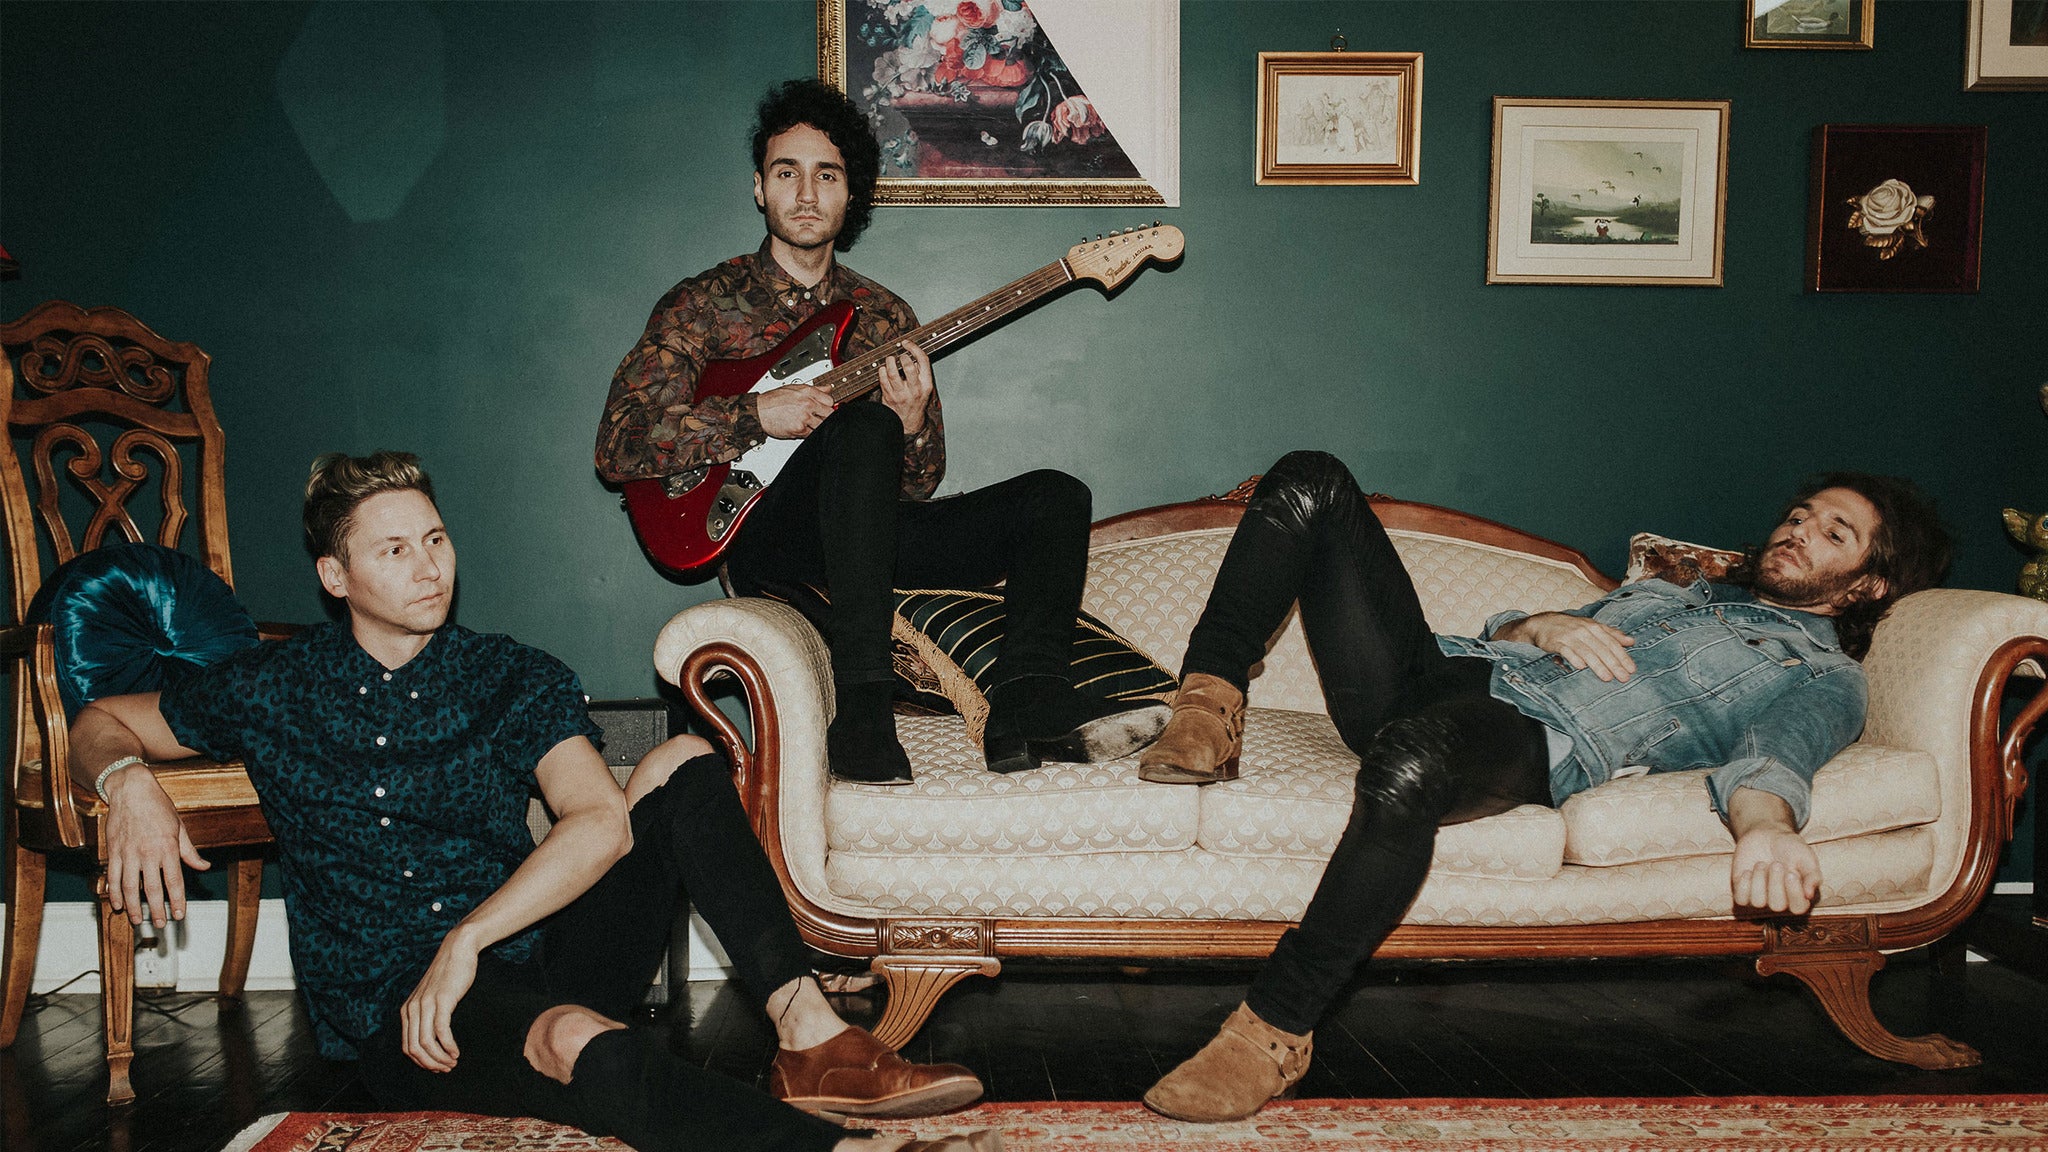 Smallpools presale password for performance tickets in San Diego, CA (House of Blues San Diego)